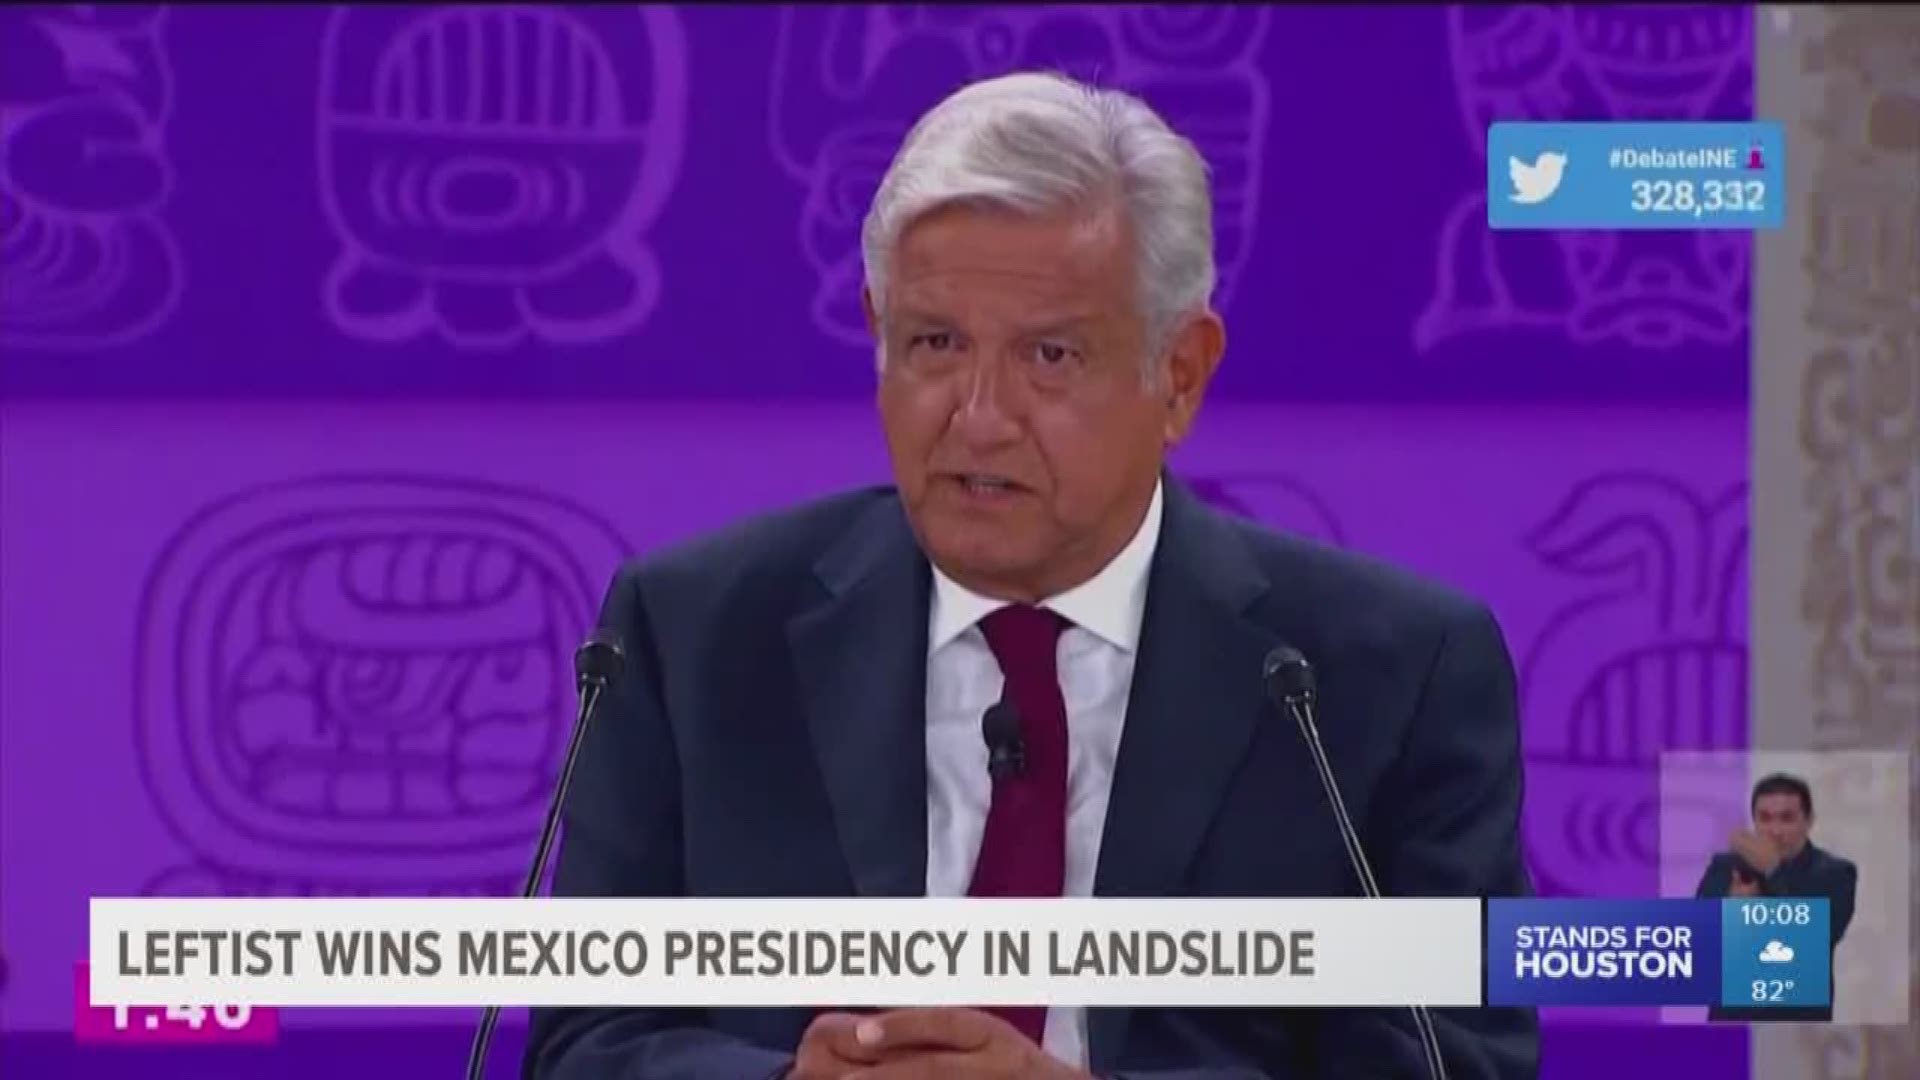 Leftist populist Andres Manuel Lopez Obrador was on the brink of a historic presidential win Sunday night as an exit poll gave him an overwhelming lead and both of his chief rivals conceded defeat.